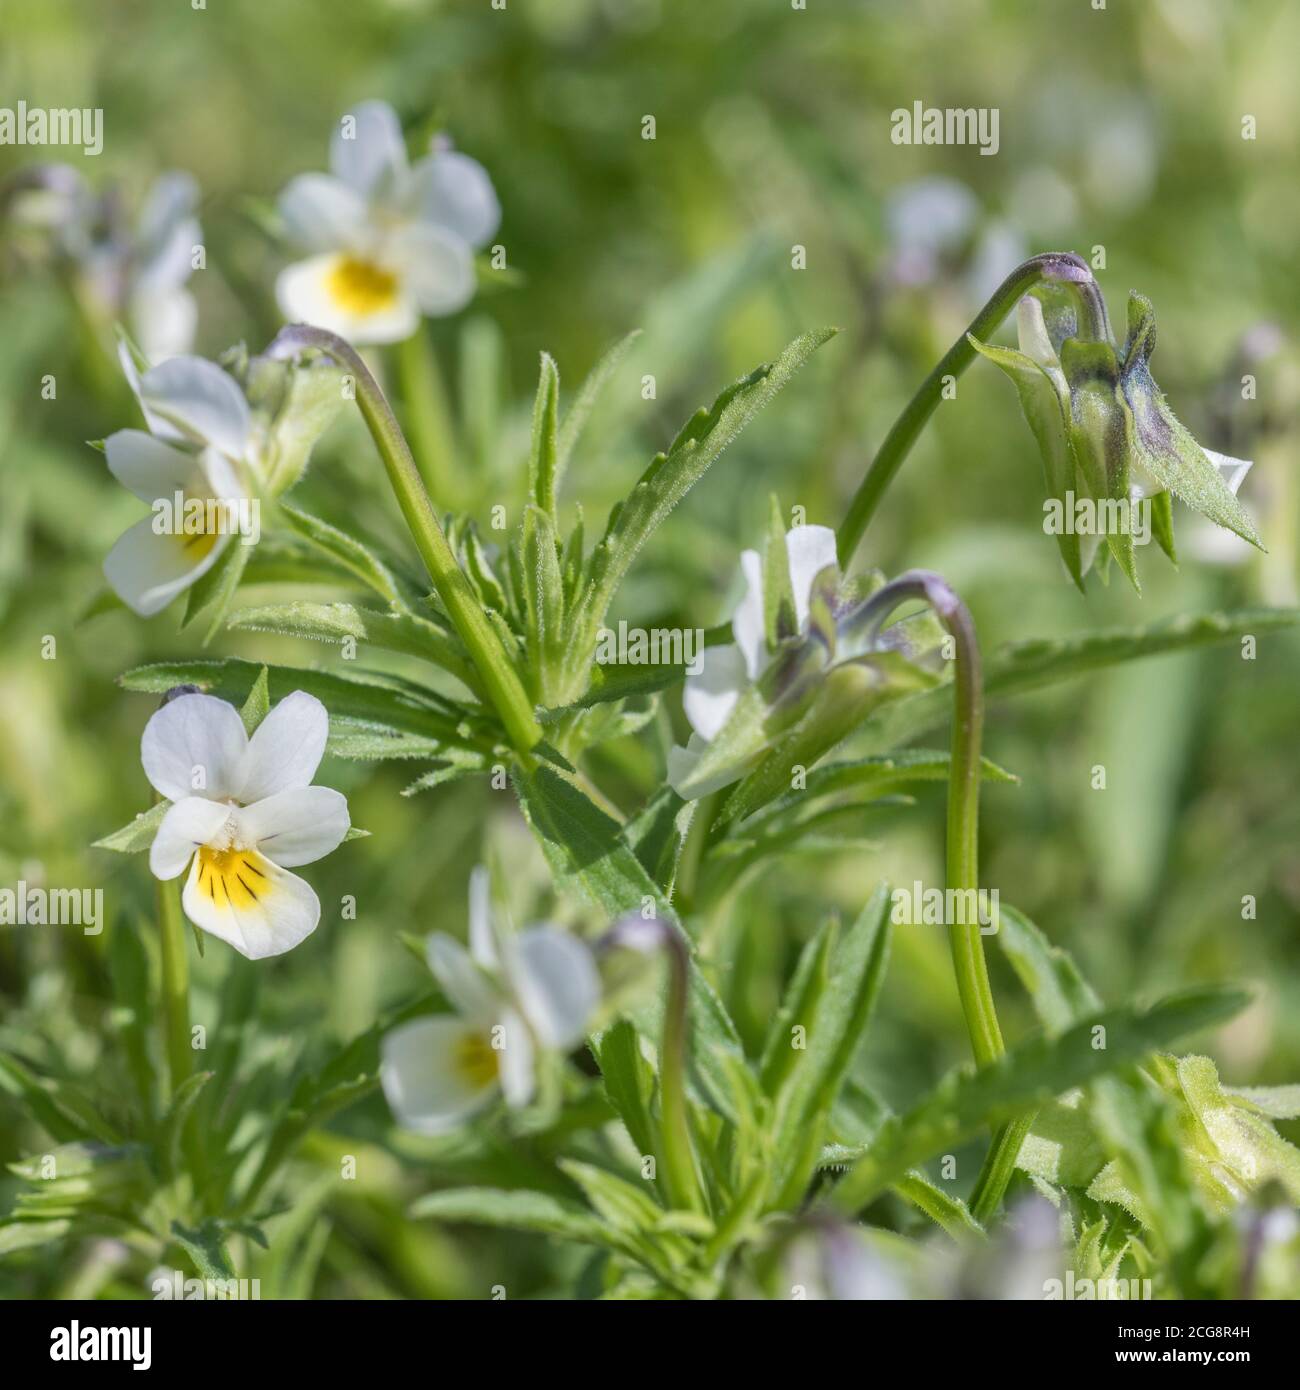 Close shot of the pale cream-coloured flowers of the Wild Pansy, Field Pansy / Viola arvensis growing in an arable field. Plant had no real uses. Stock Photo